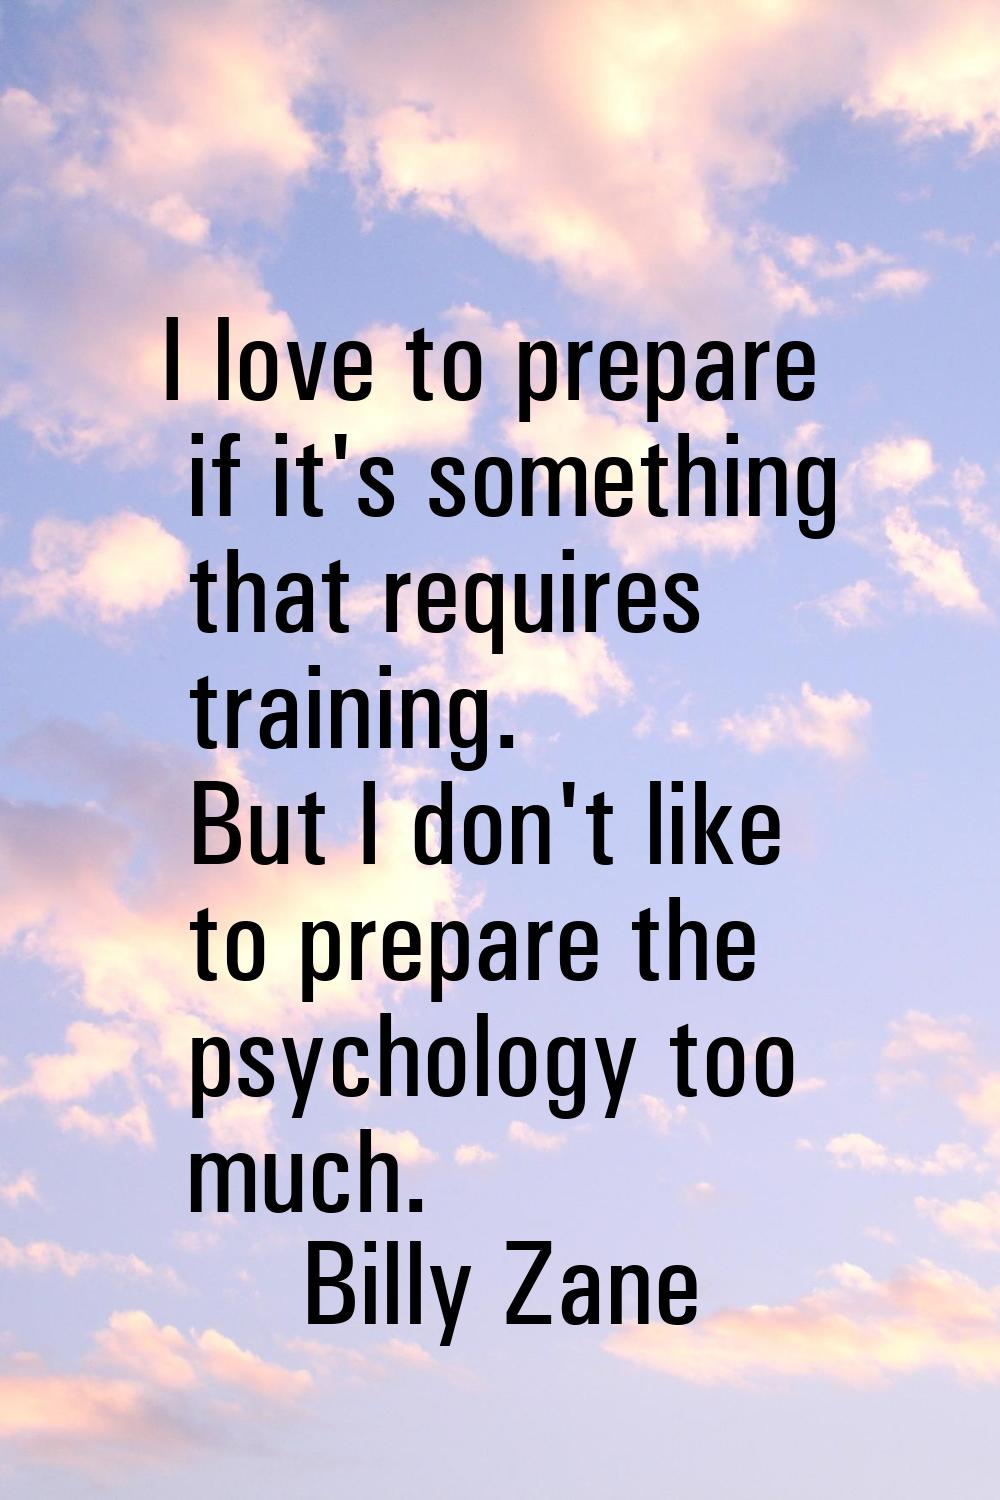 I love to prepare if it's something that requires training. But I don't like to prepare the psychol